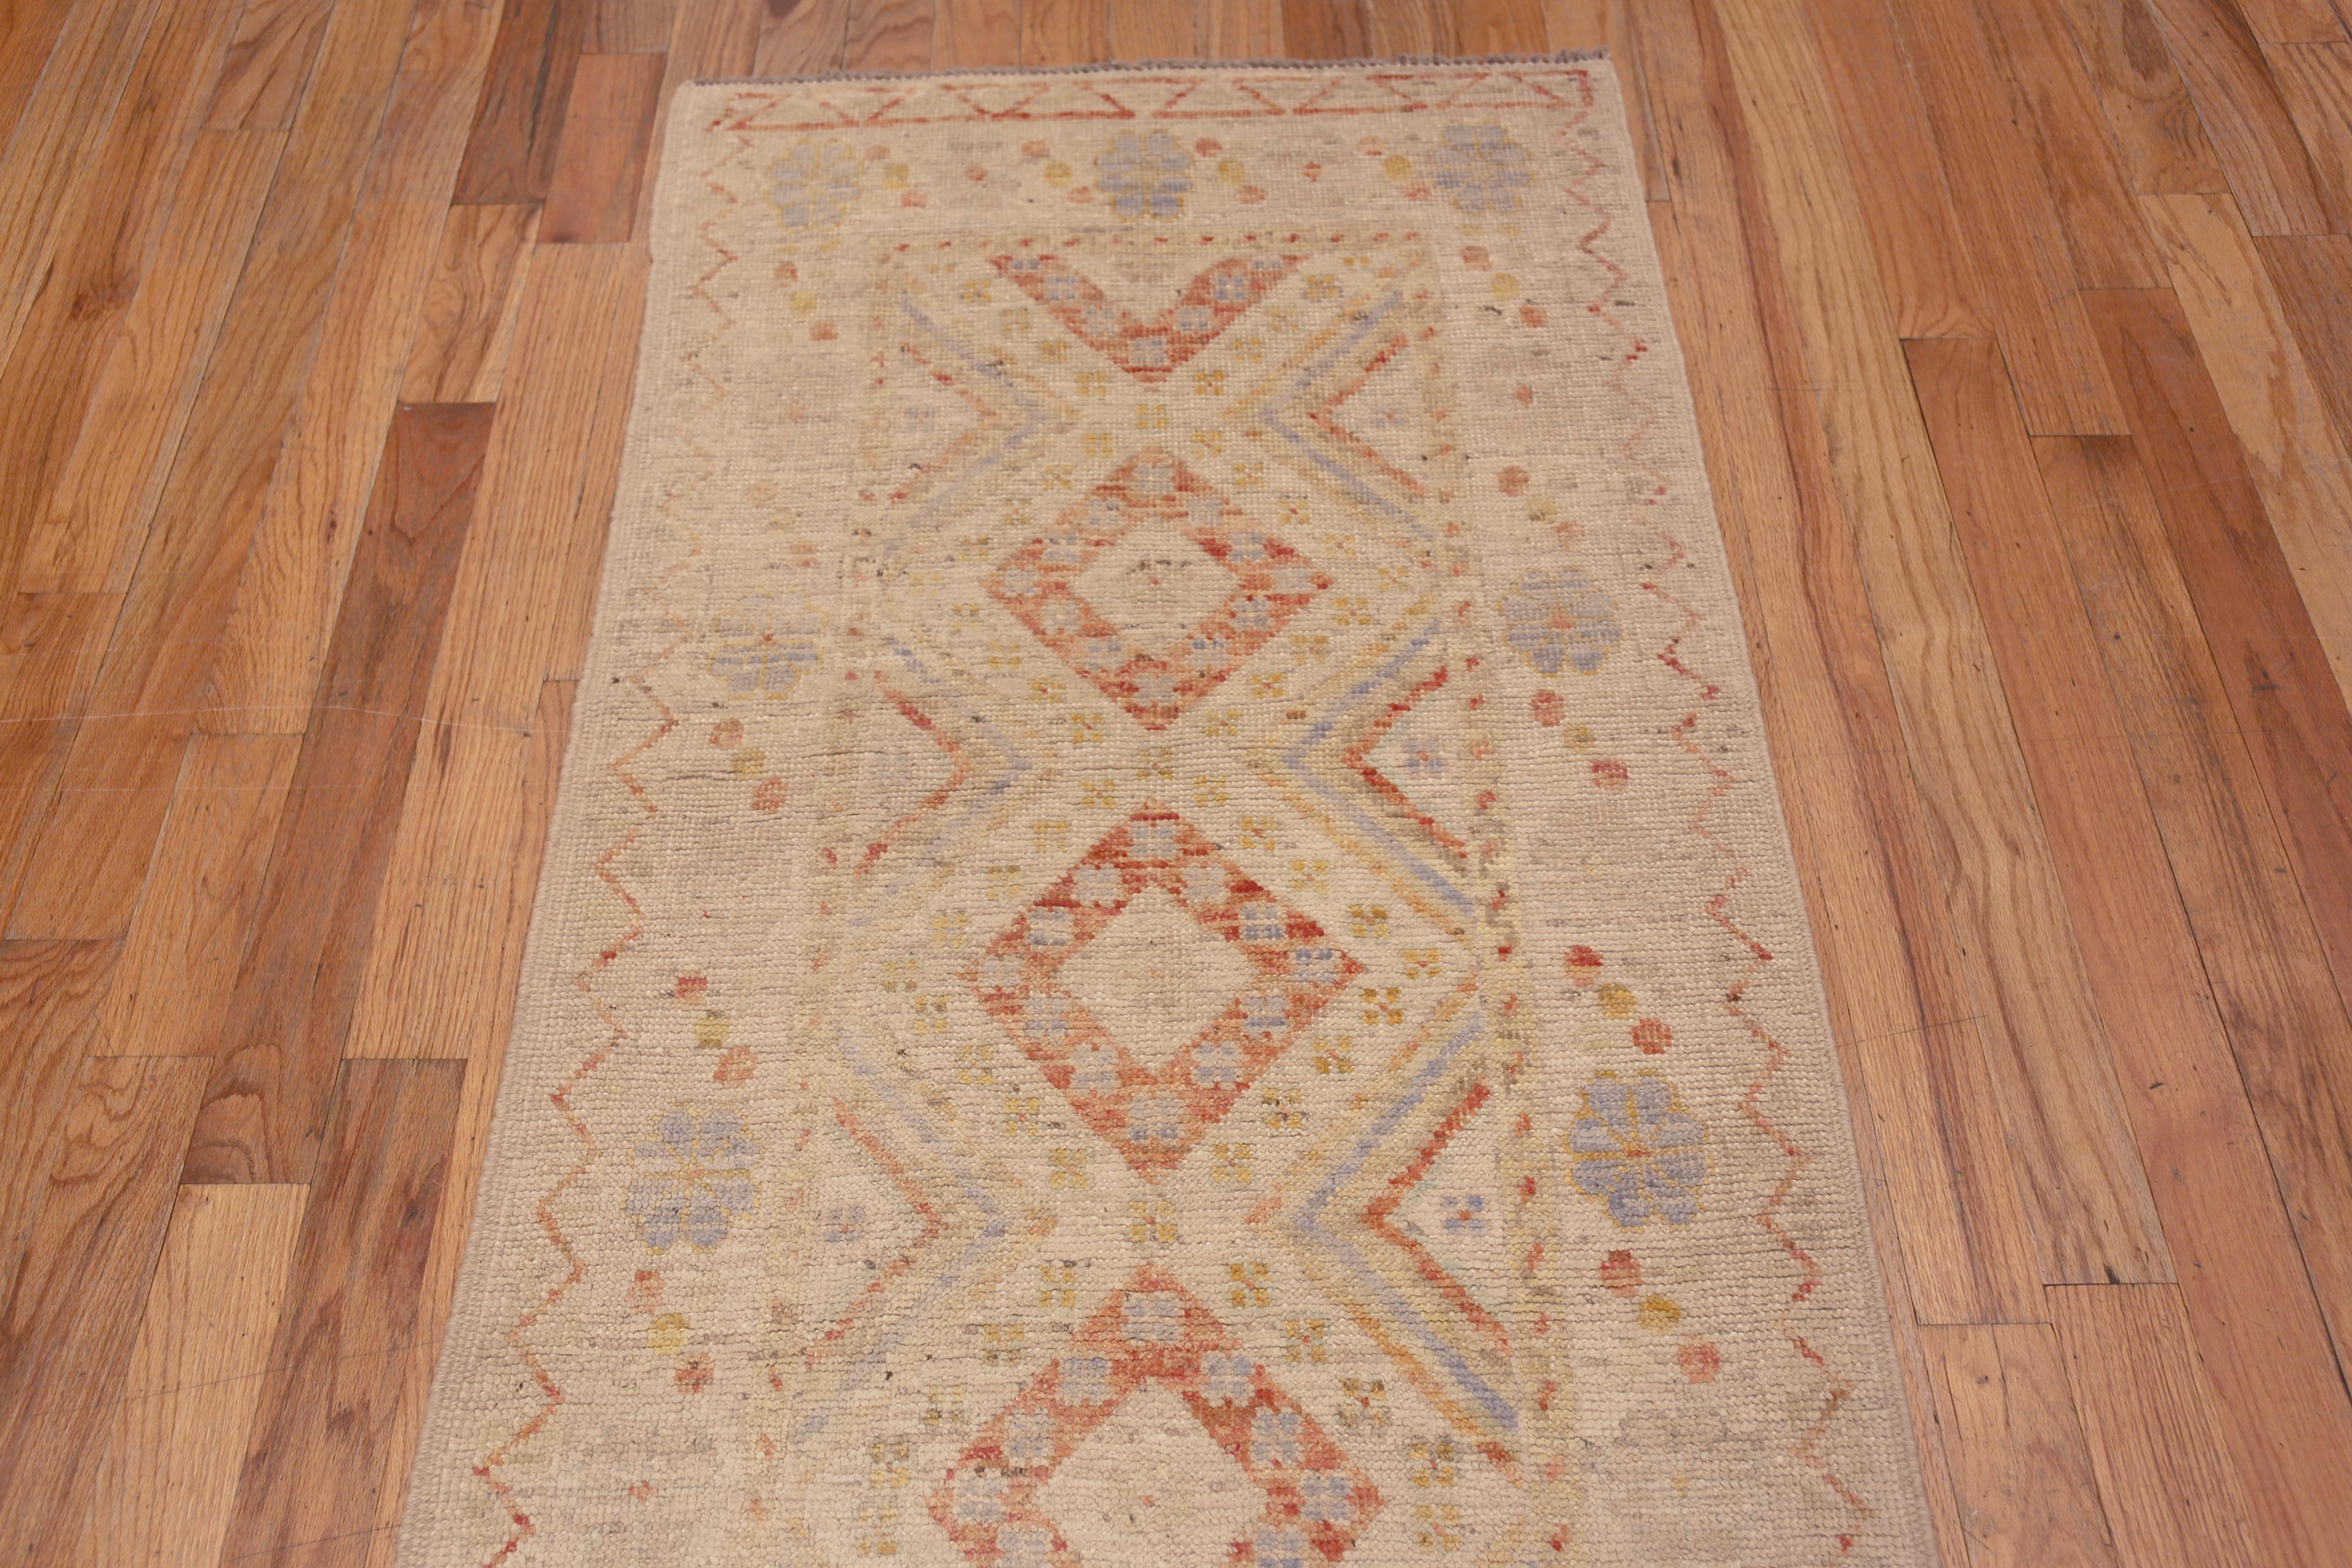 Central Asian Nazmiyal Collection Modern Tribal Geometric Rustic Runner Rug 2'11